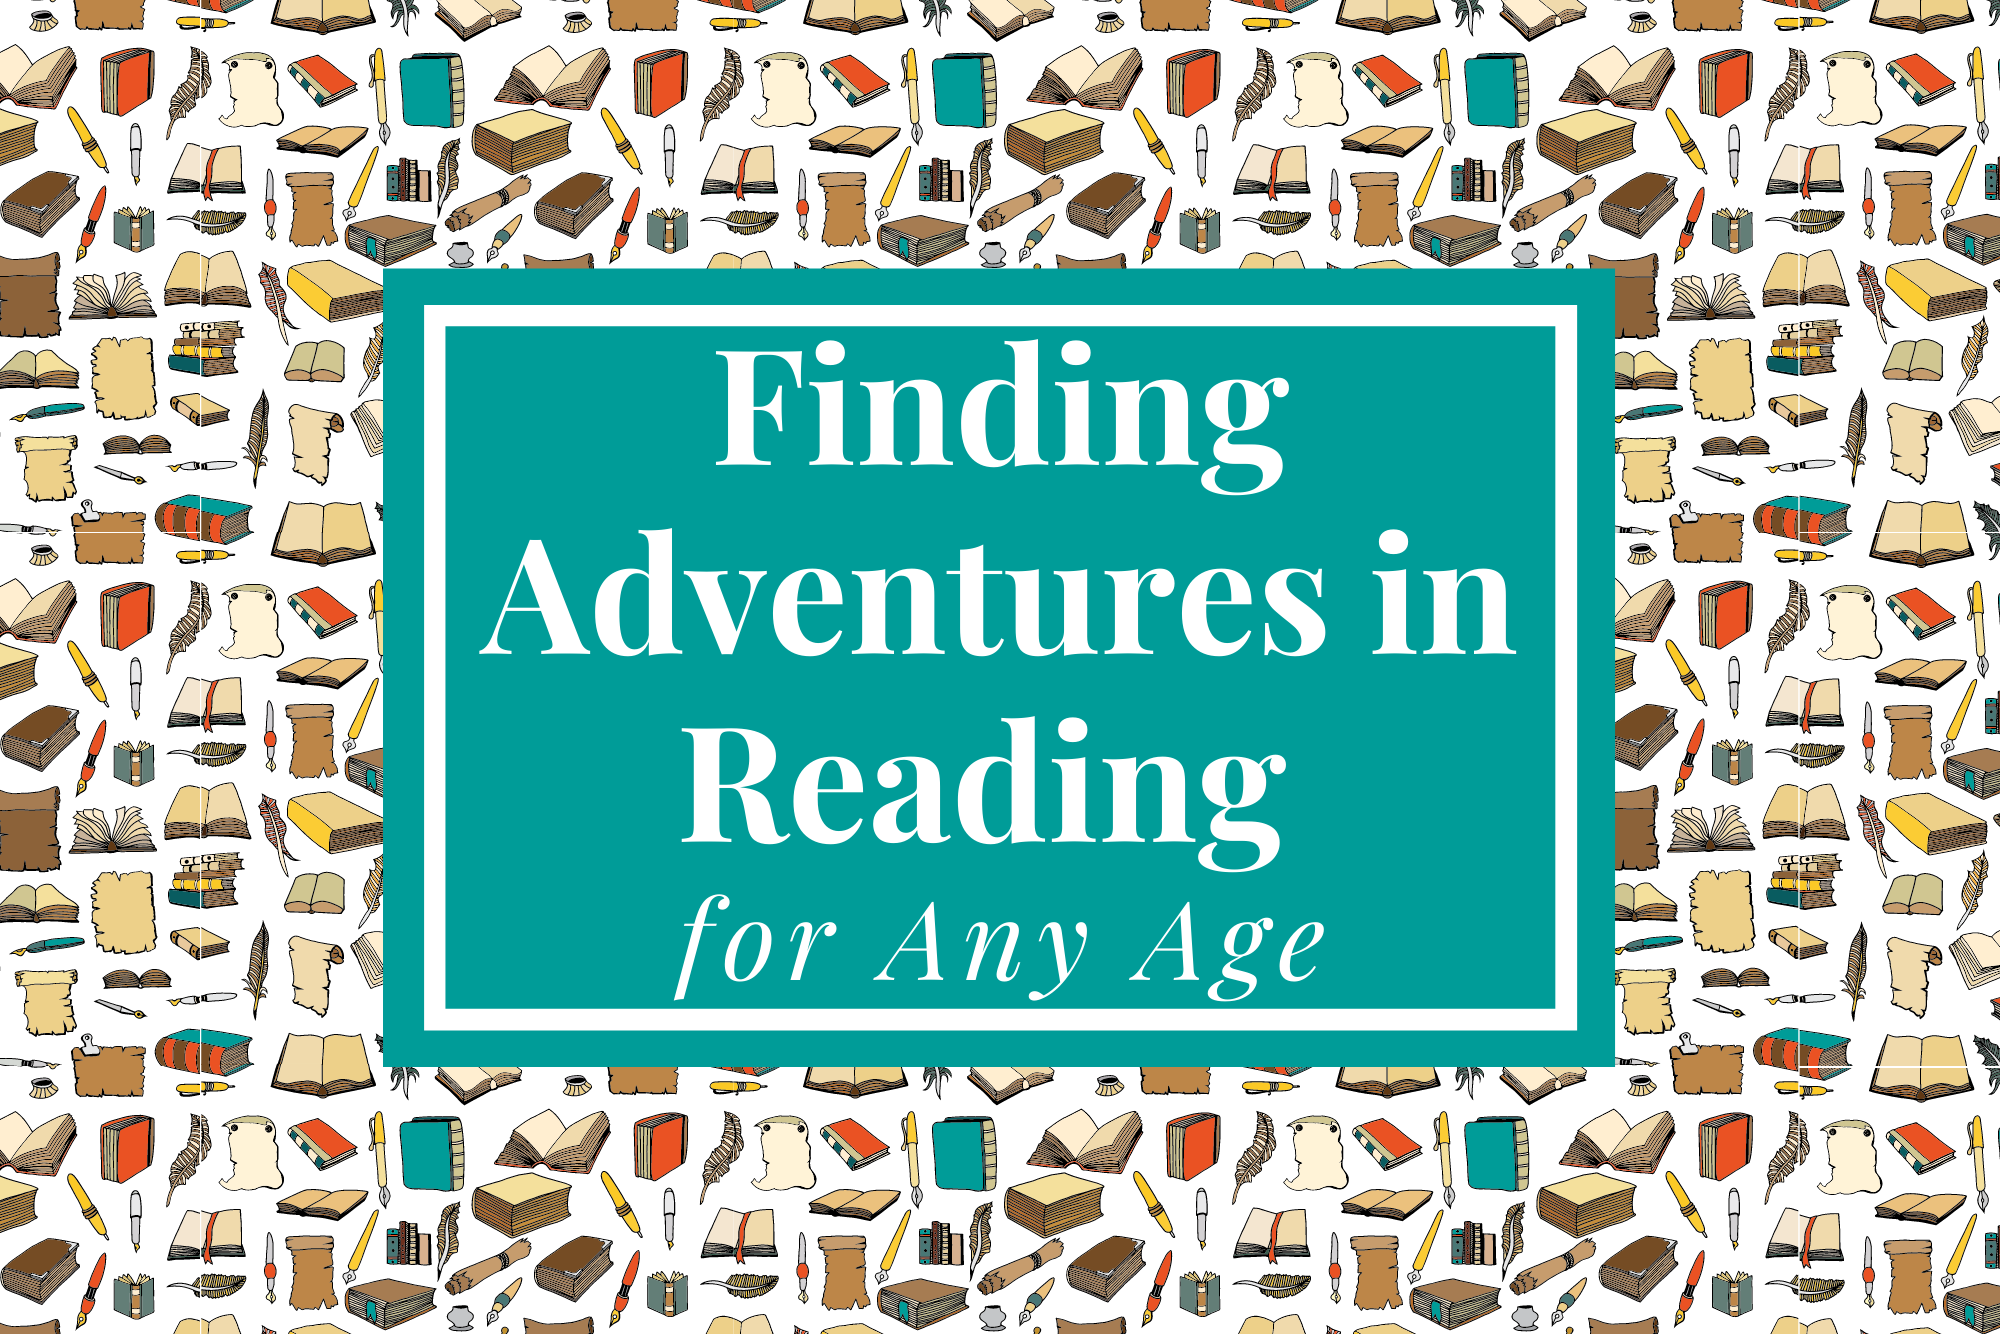 Finding Adventures in Reading for Any Age – Charles County Public Library